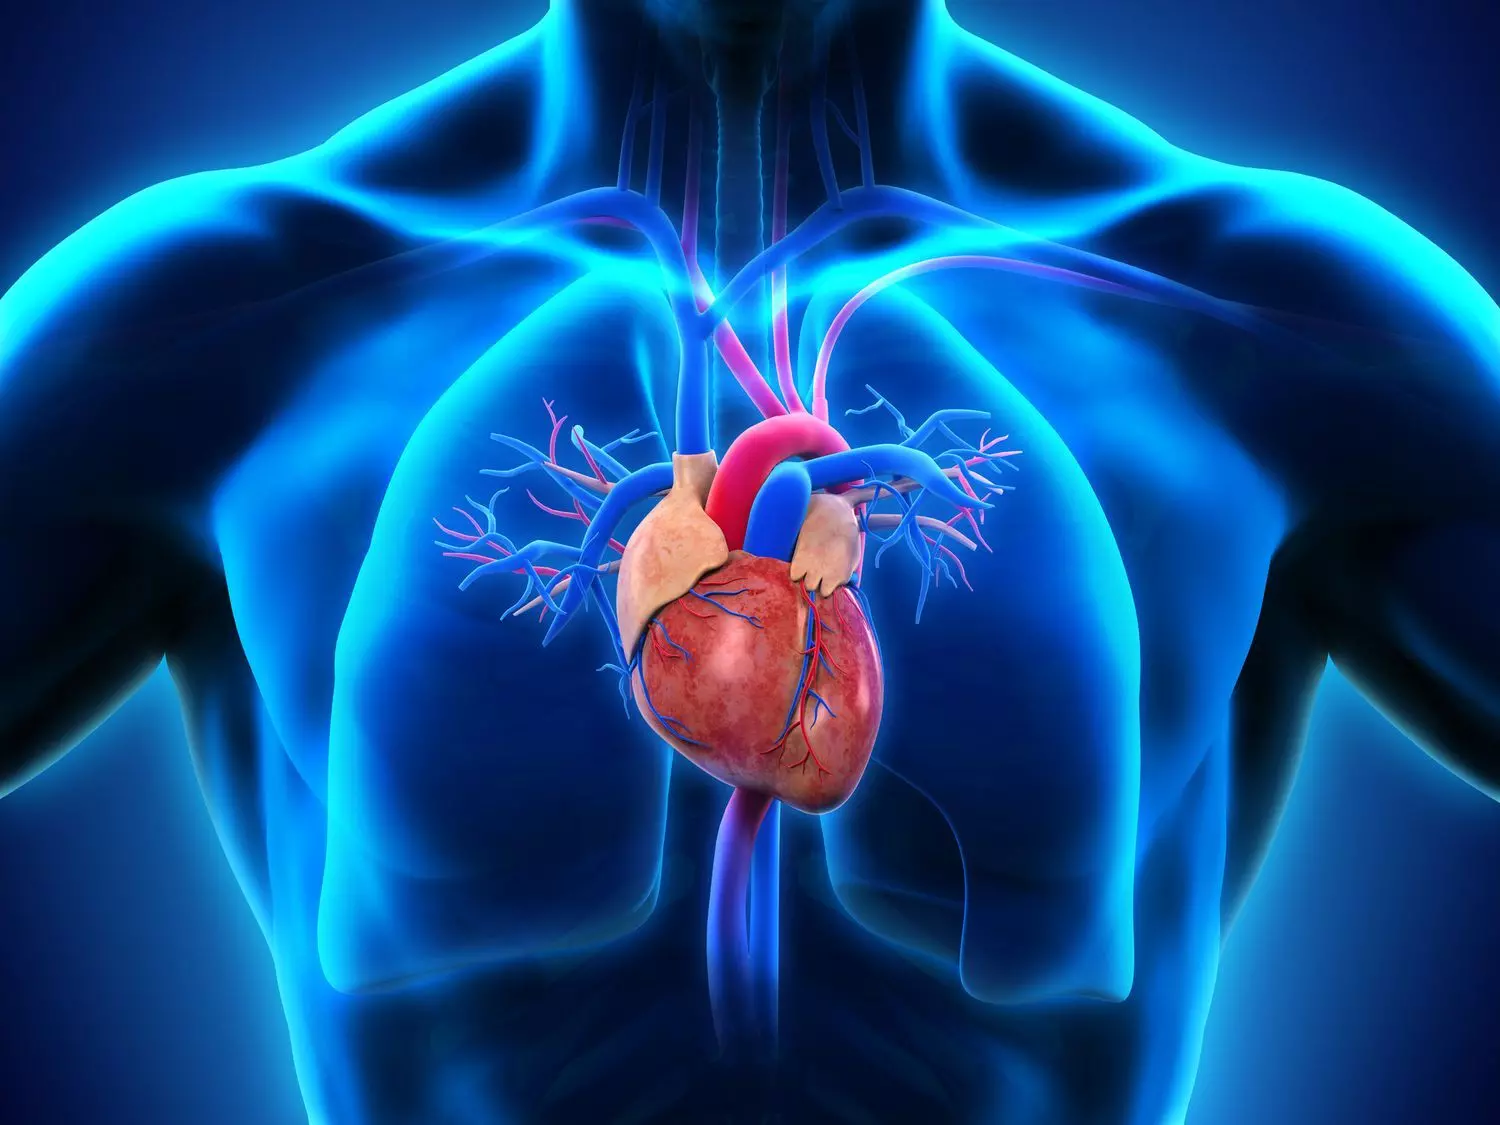 Essential heart health tips to safeguard your cardiovascular well-being